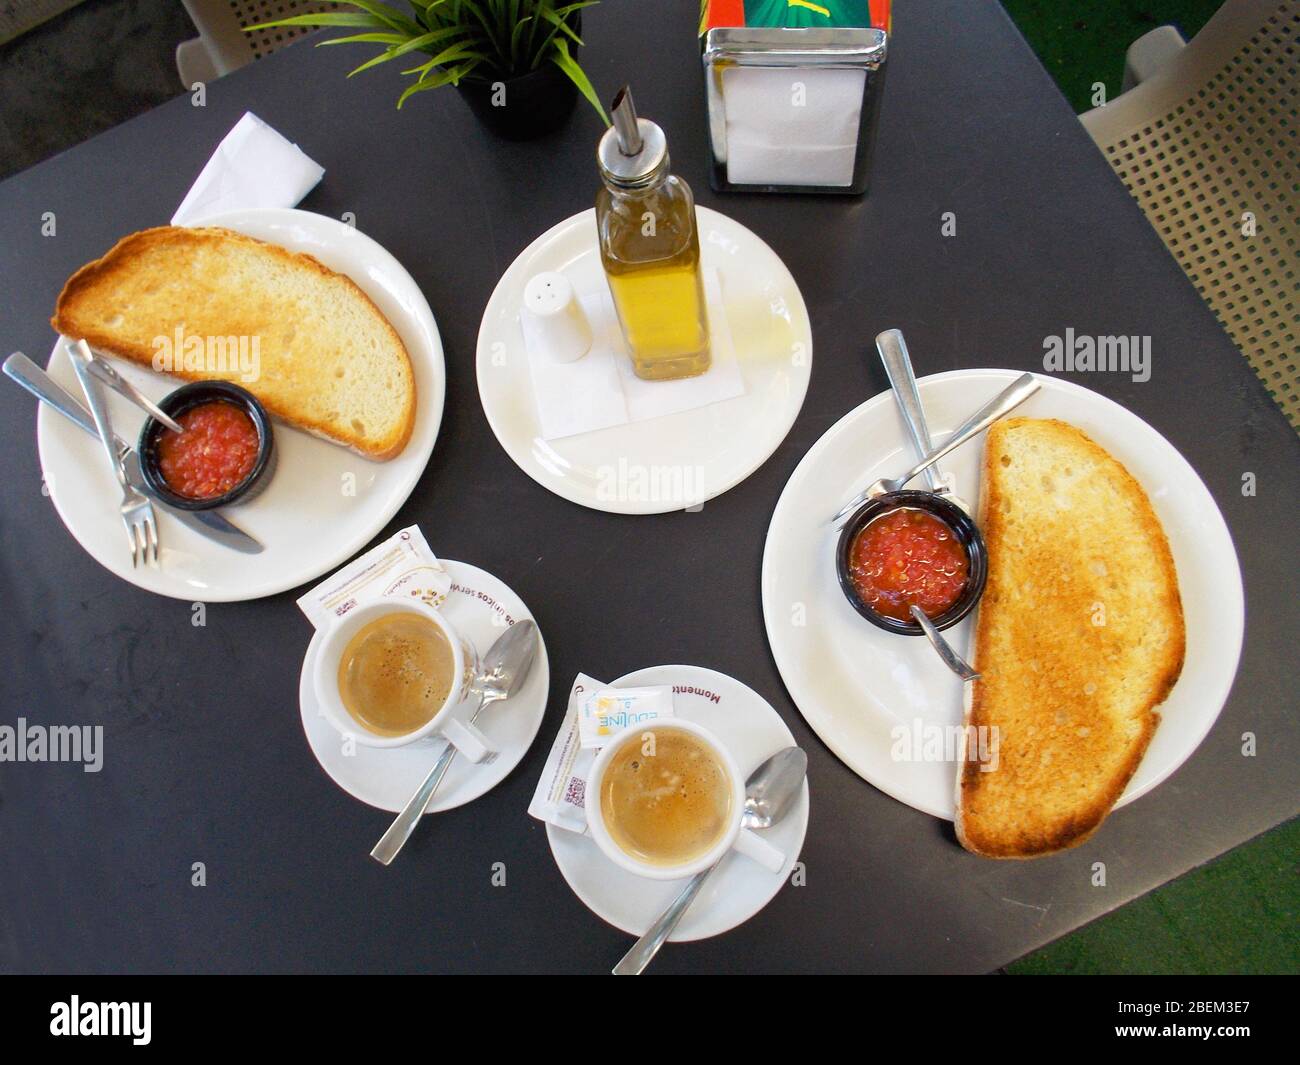 Spanish breakfast: cup of coffee, olive oil, tomato and toast. View from above. Spain. Stock Photo